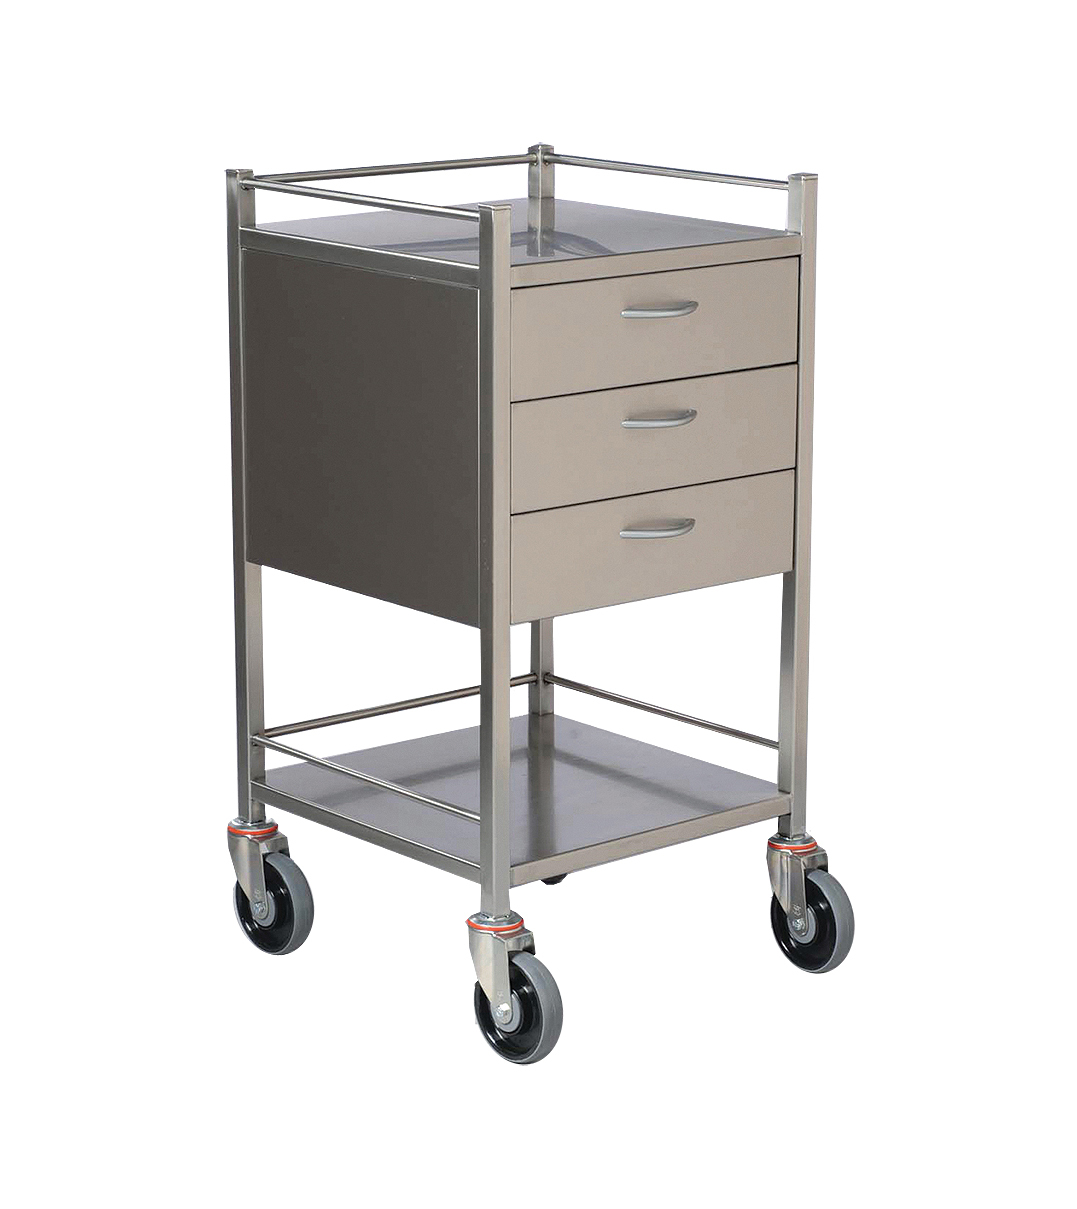 Stainless Steel Dressing Clinicart Trolley Instrument - 3 Drawer - 490 x 490mm